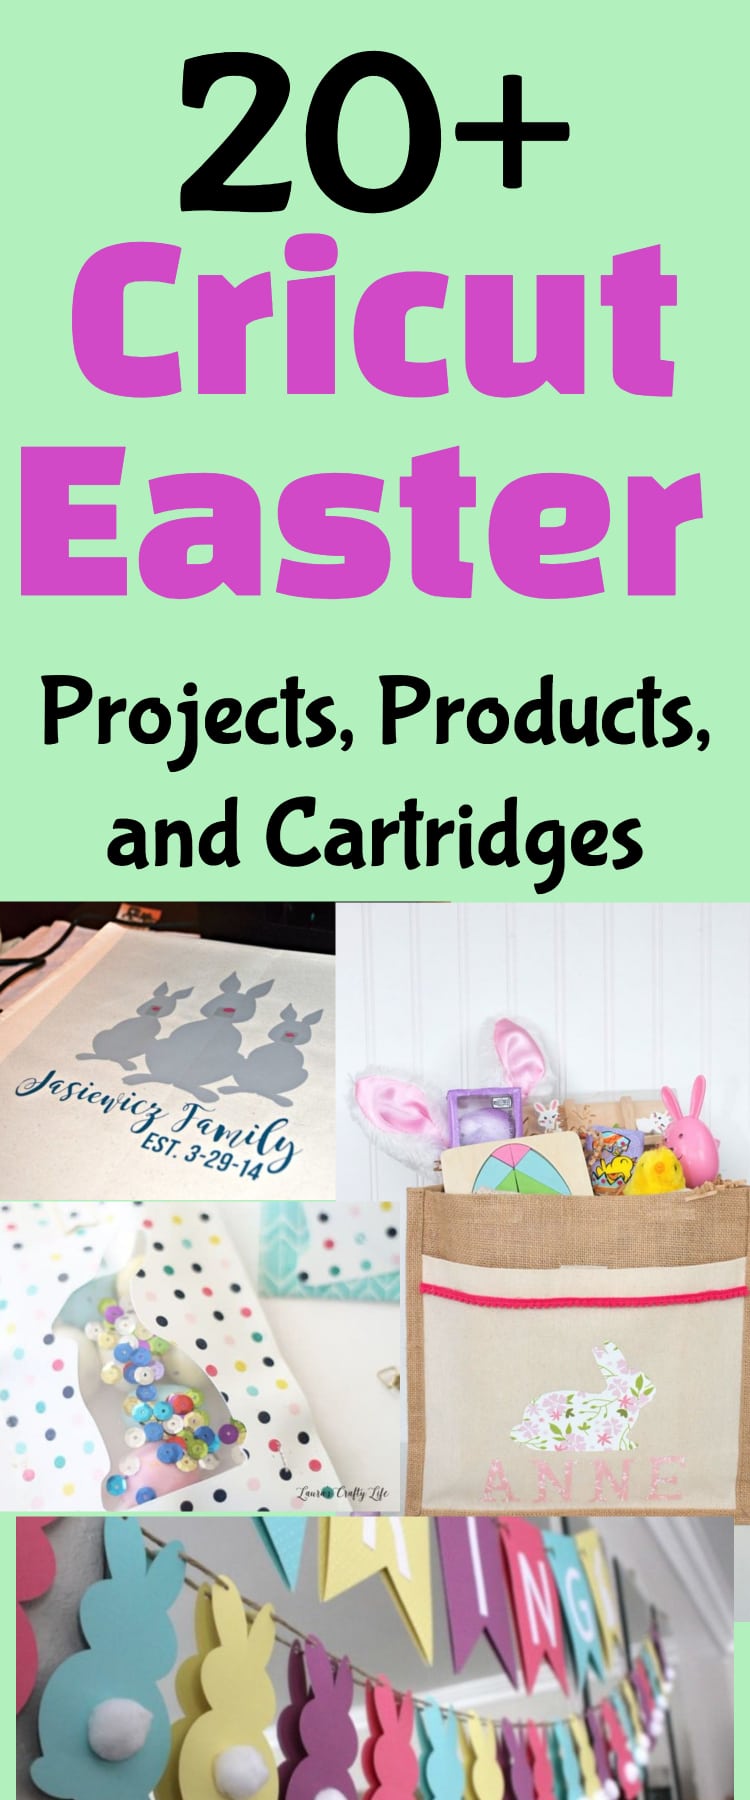 Cricut Easter Projects